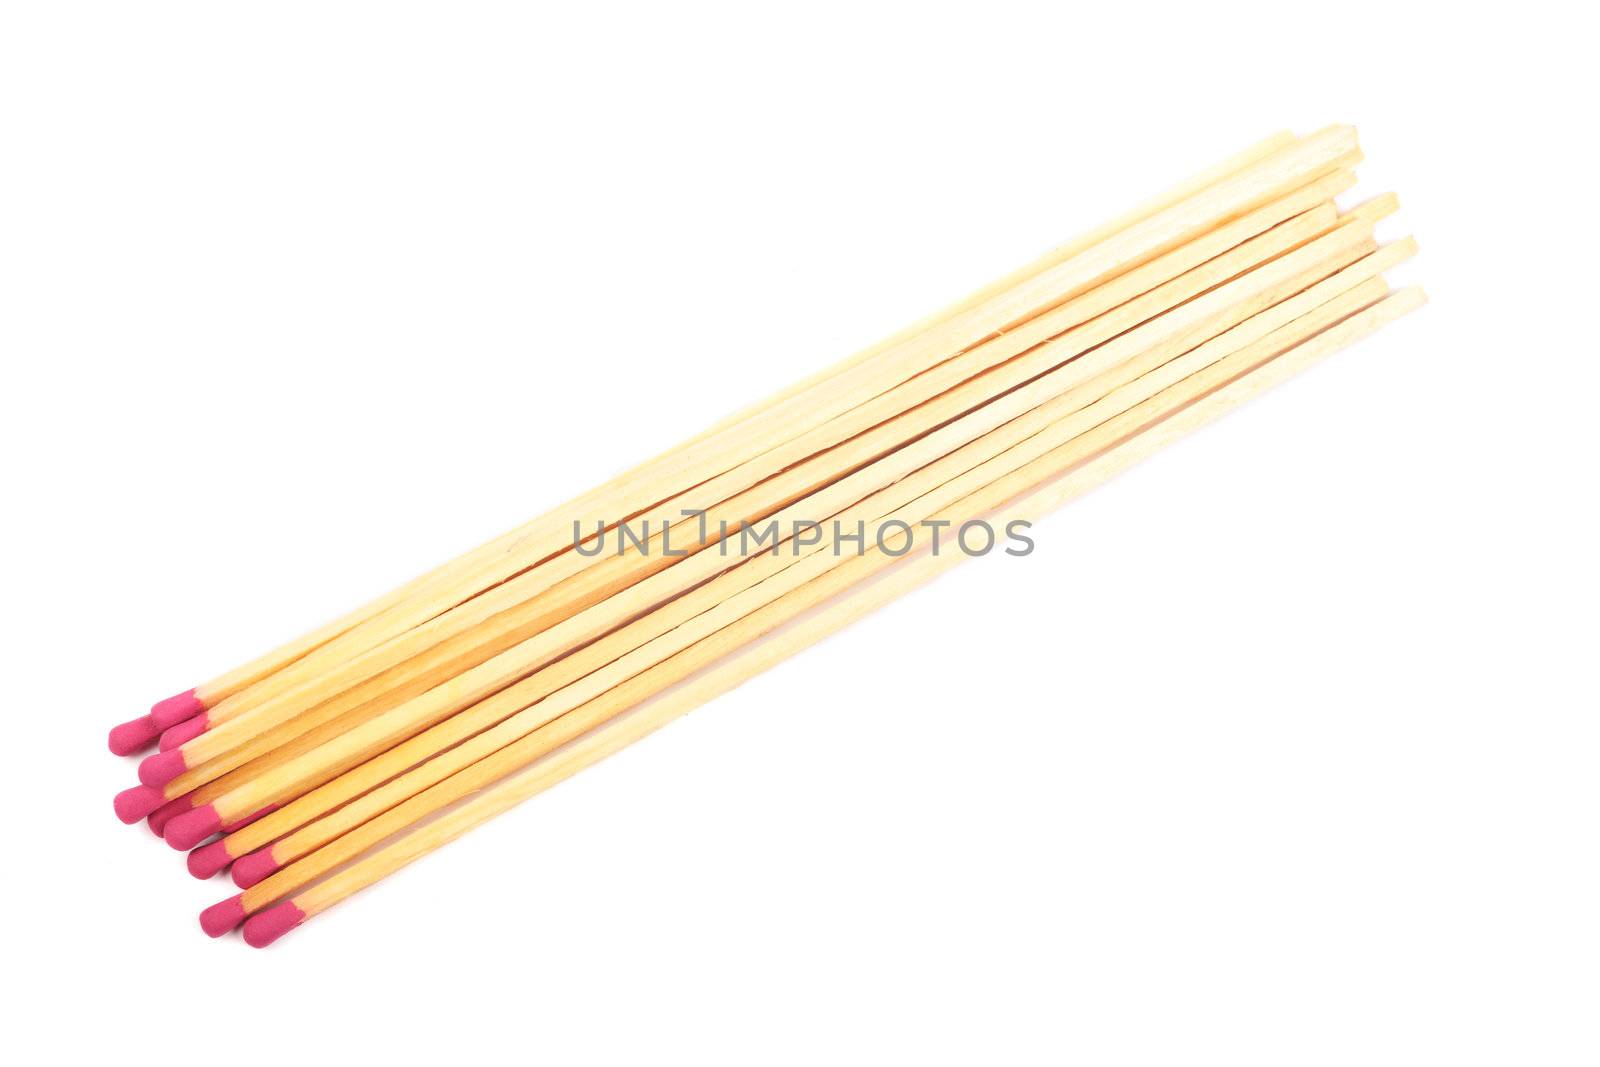 Heap of long wooden matches isolated on white background.